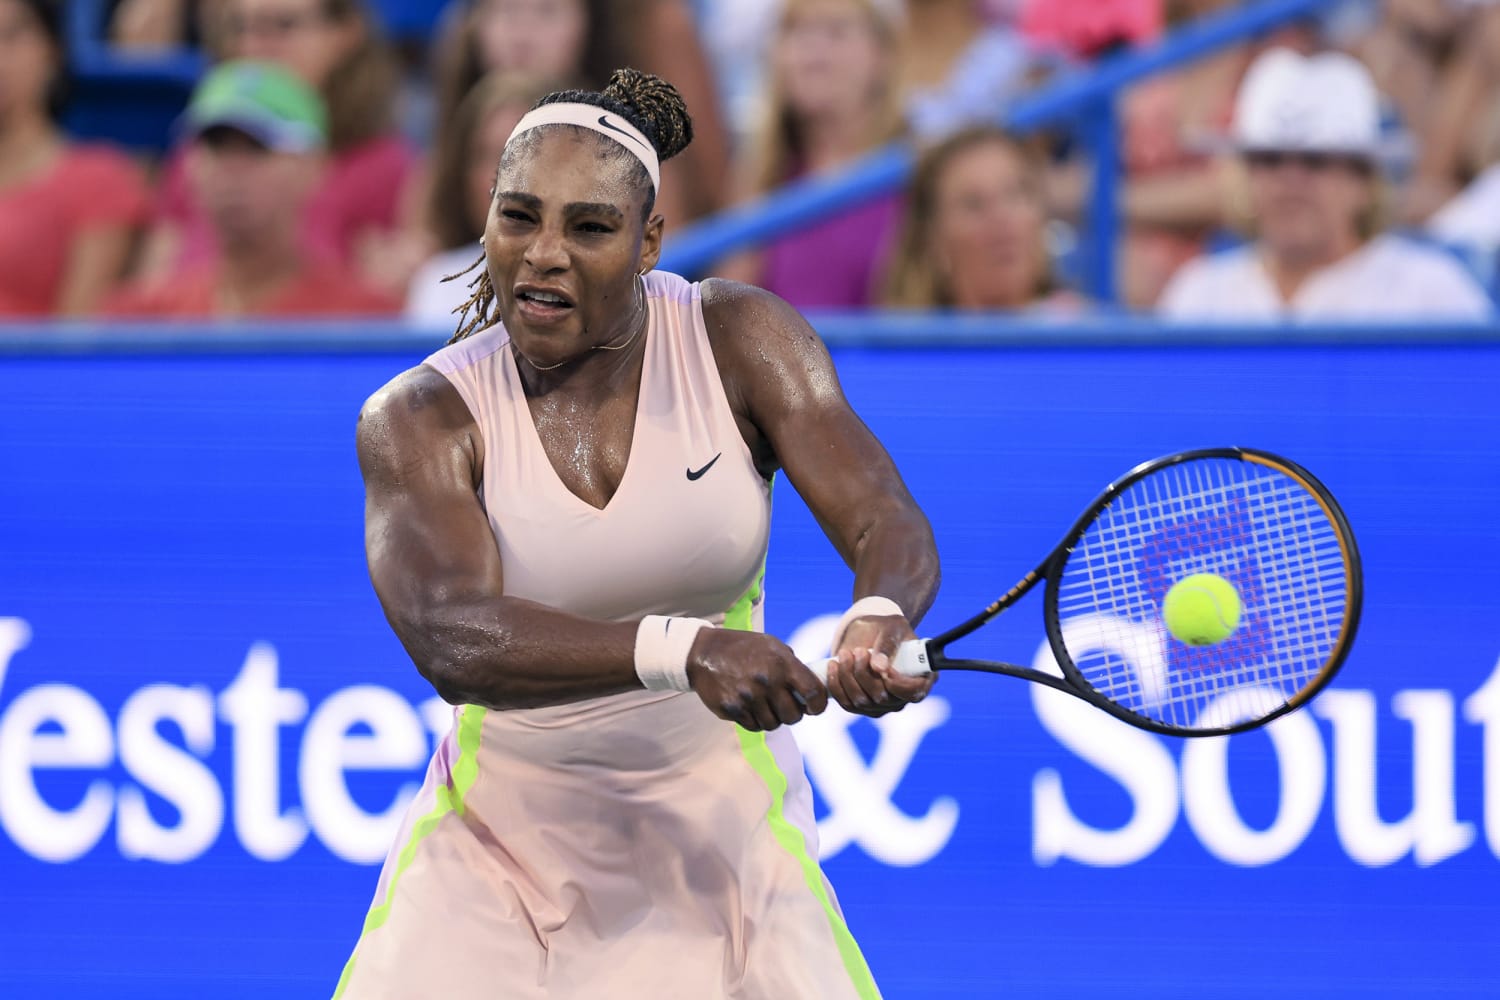 Serena Williams farewell tour Williams loses to Raducanu in Western and Southern Open